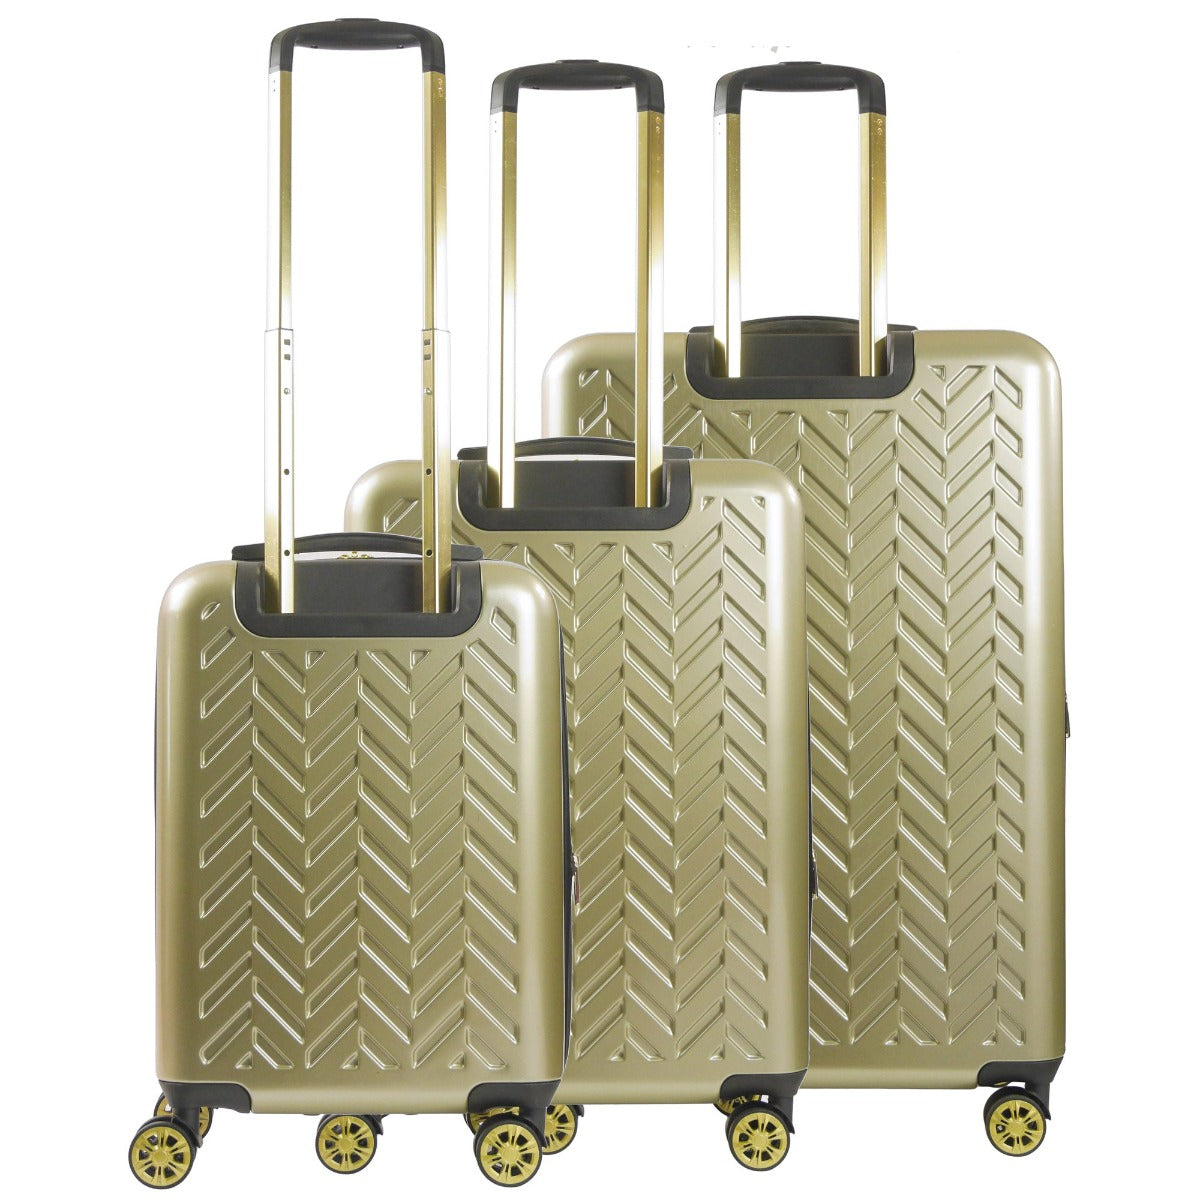 Ful Groove hardside spinner 3 piece gold luggage set 22 inch 27 inch 31 inch